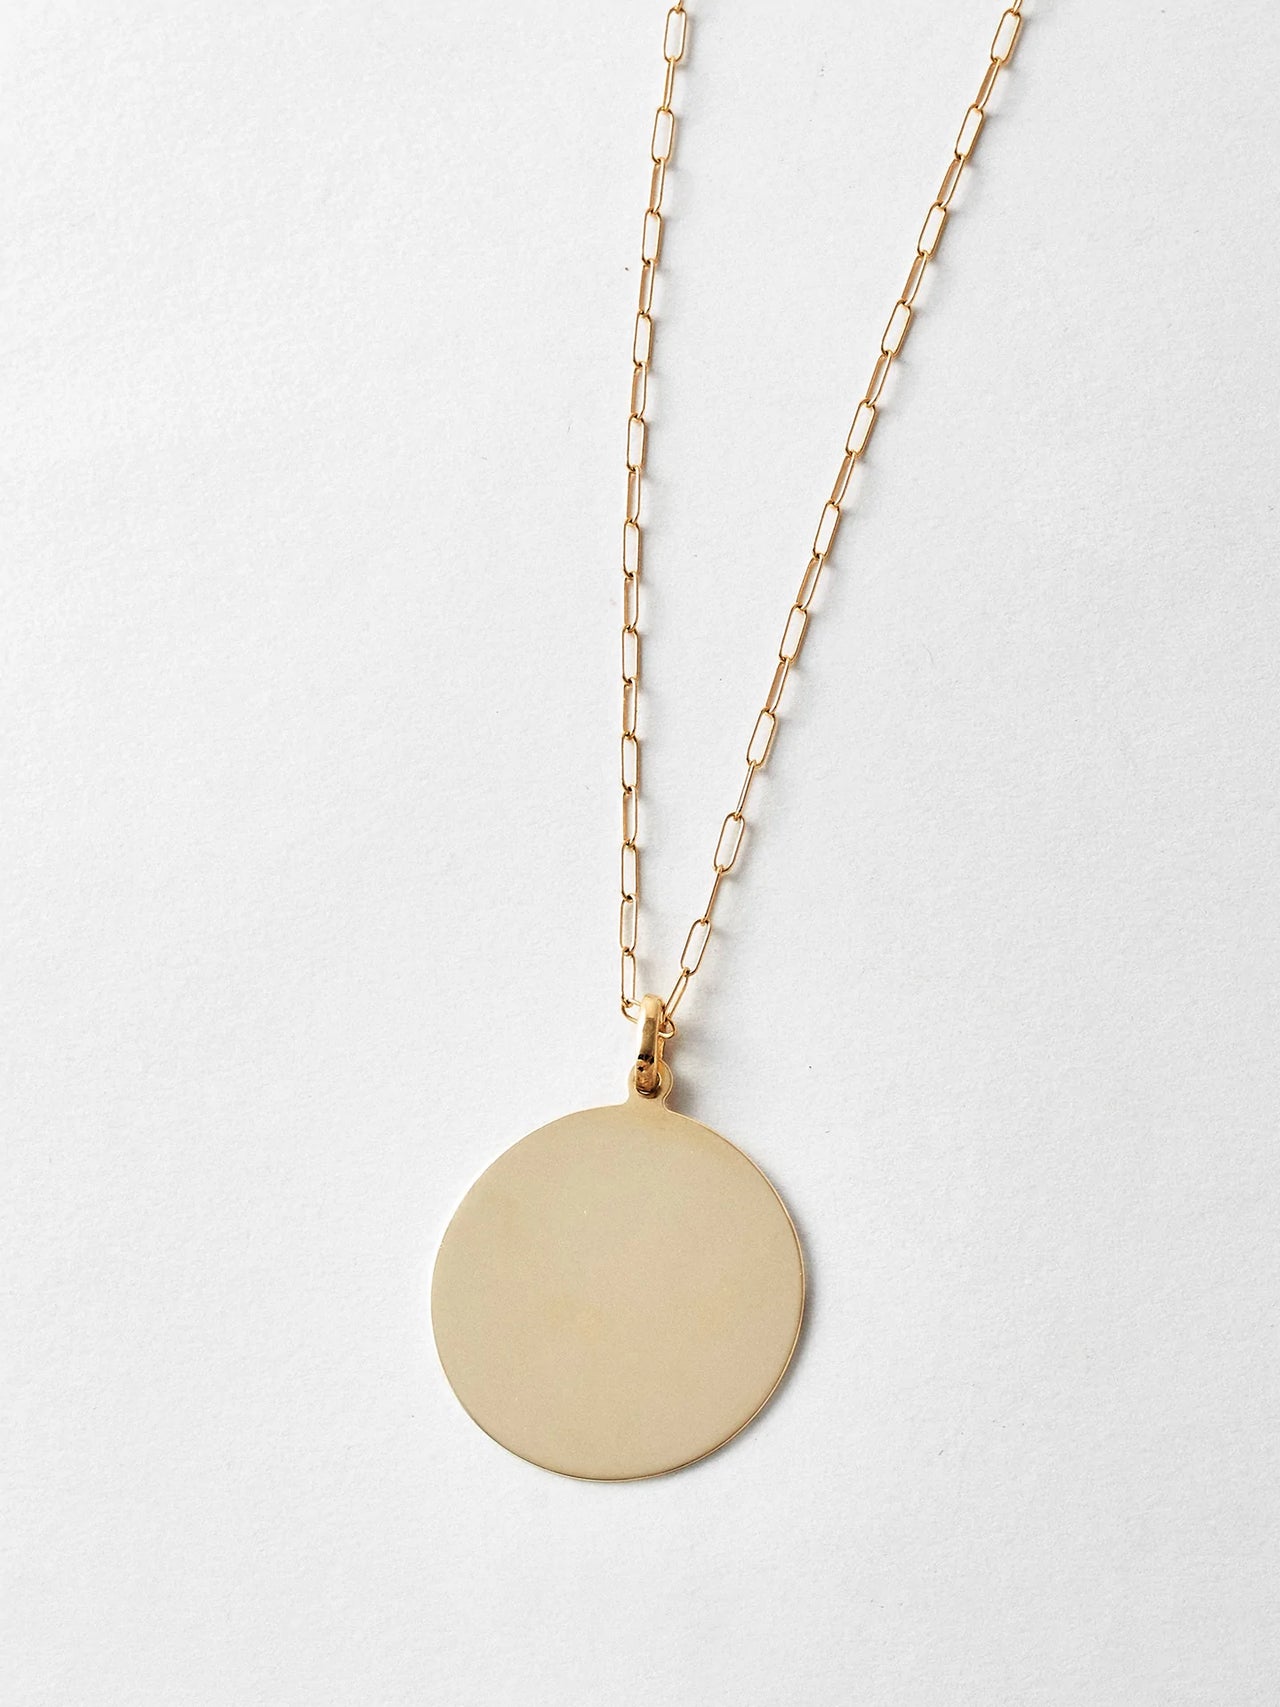 14kt Yellow Gold XL Disk Pendant, 30mm Width, shot on chain. Light grey background.